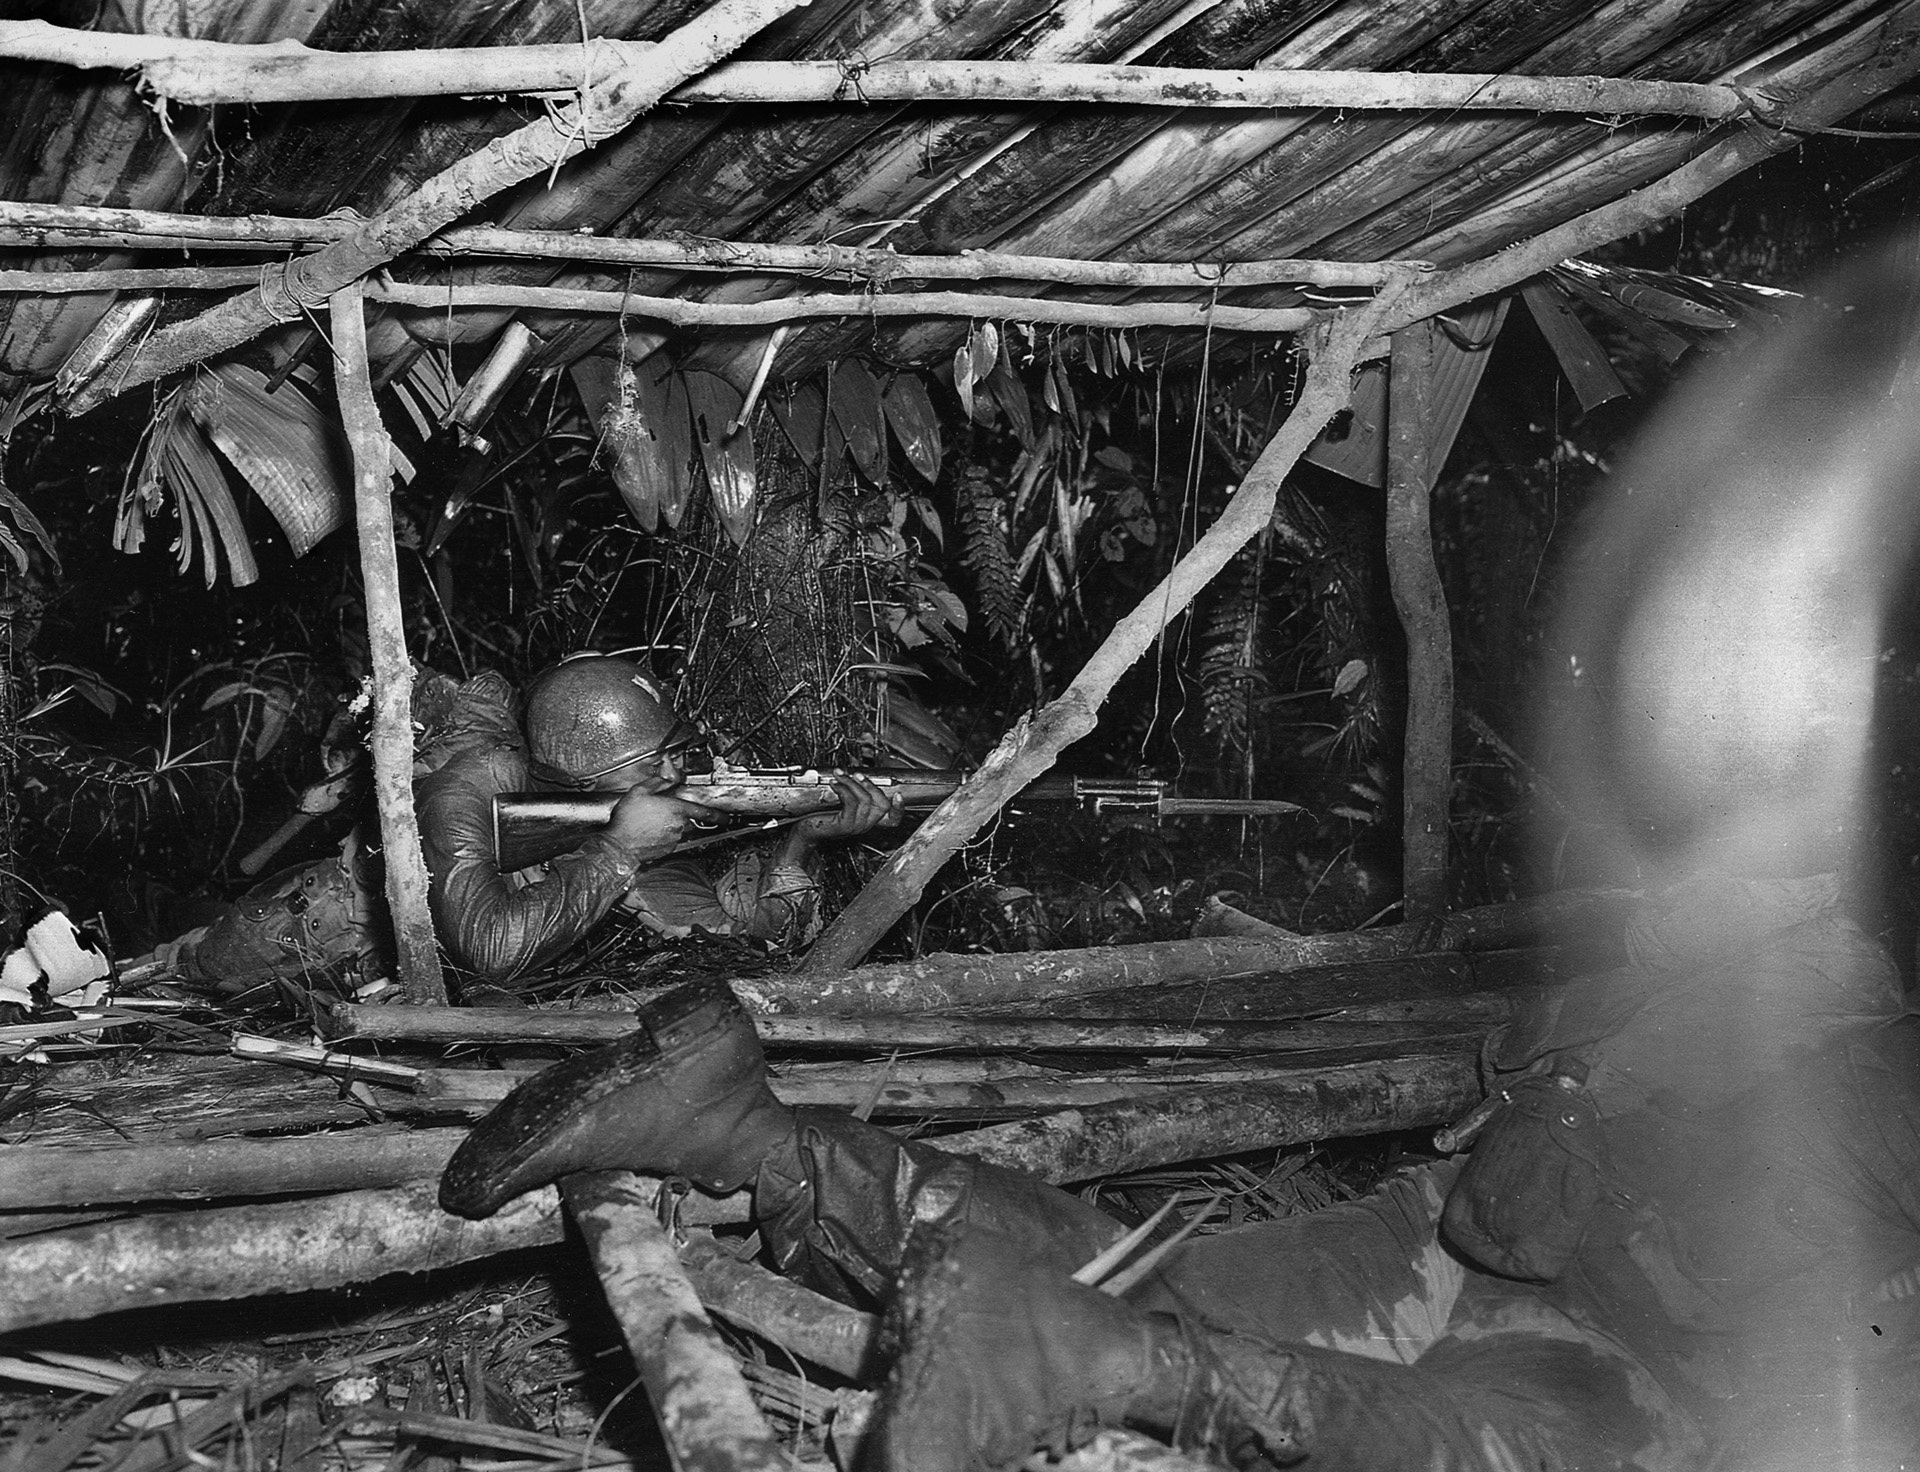 A 25th Infantry Regiment soldier, supporting the 23rd (Americal) Infantry Division, takes aim at Japanese troops in an enemy bivouac area on Bougainville, April 6, 1944.